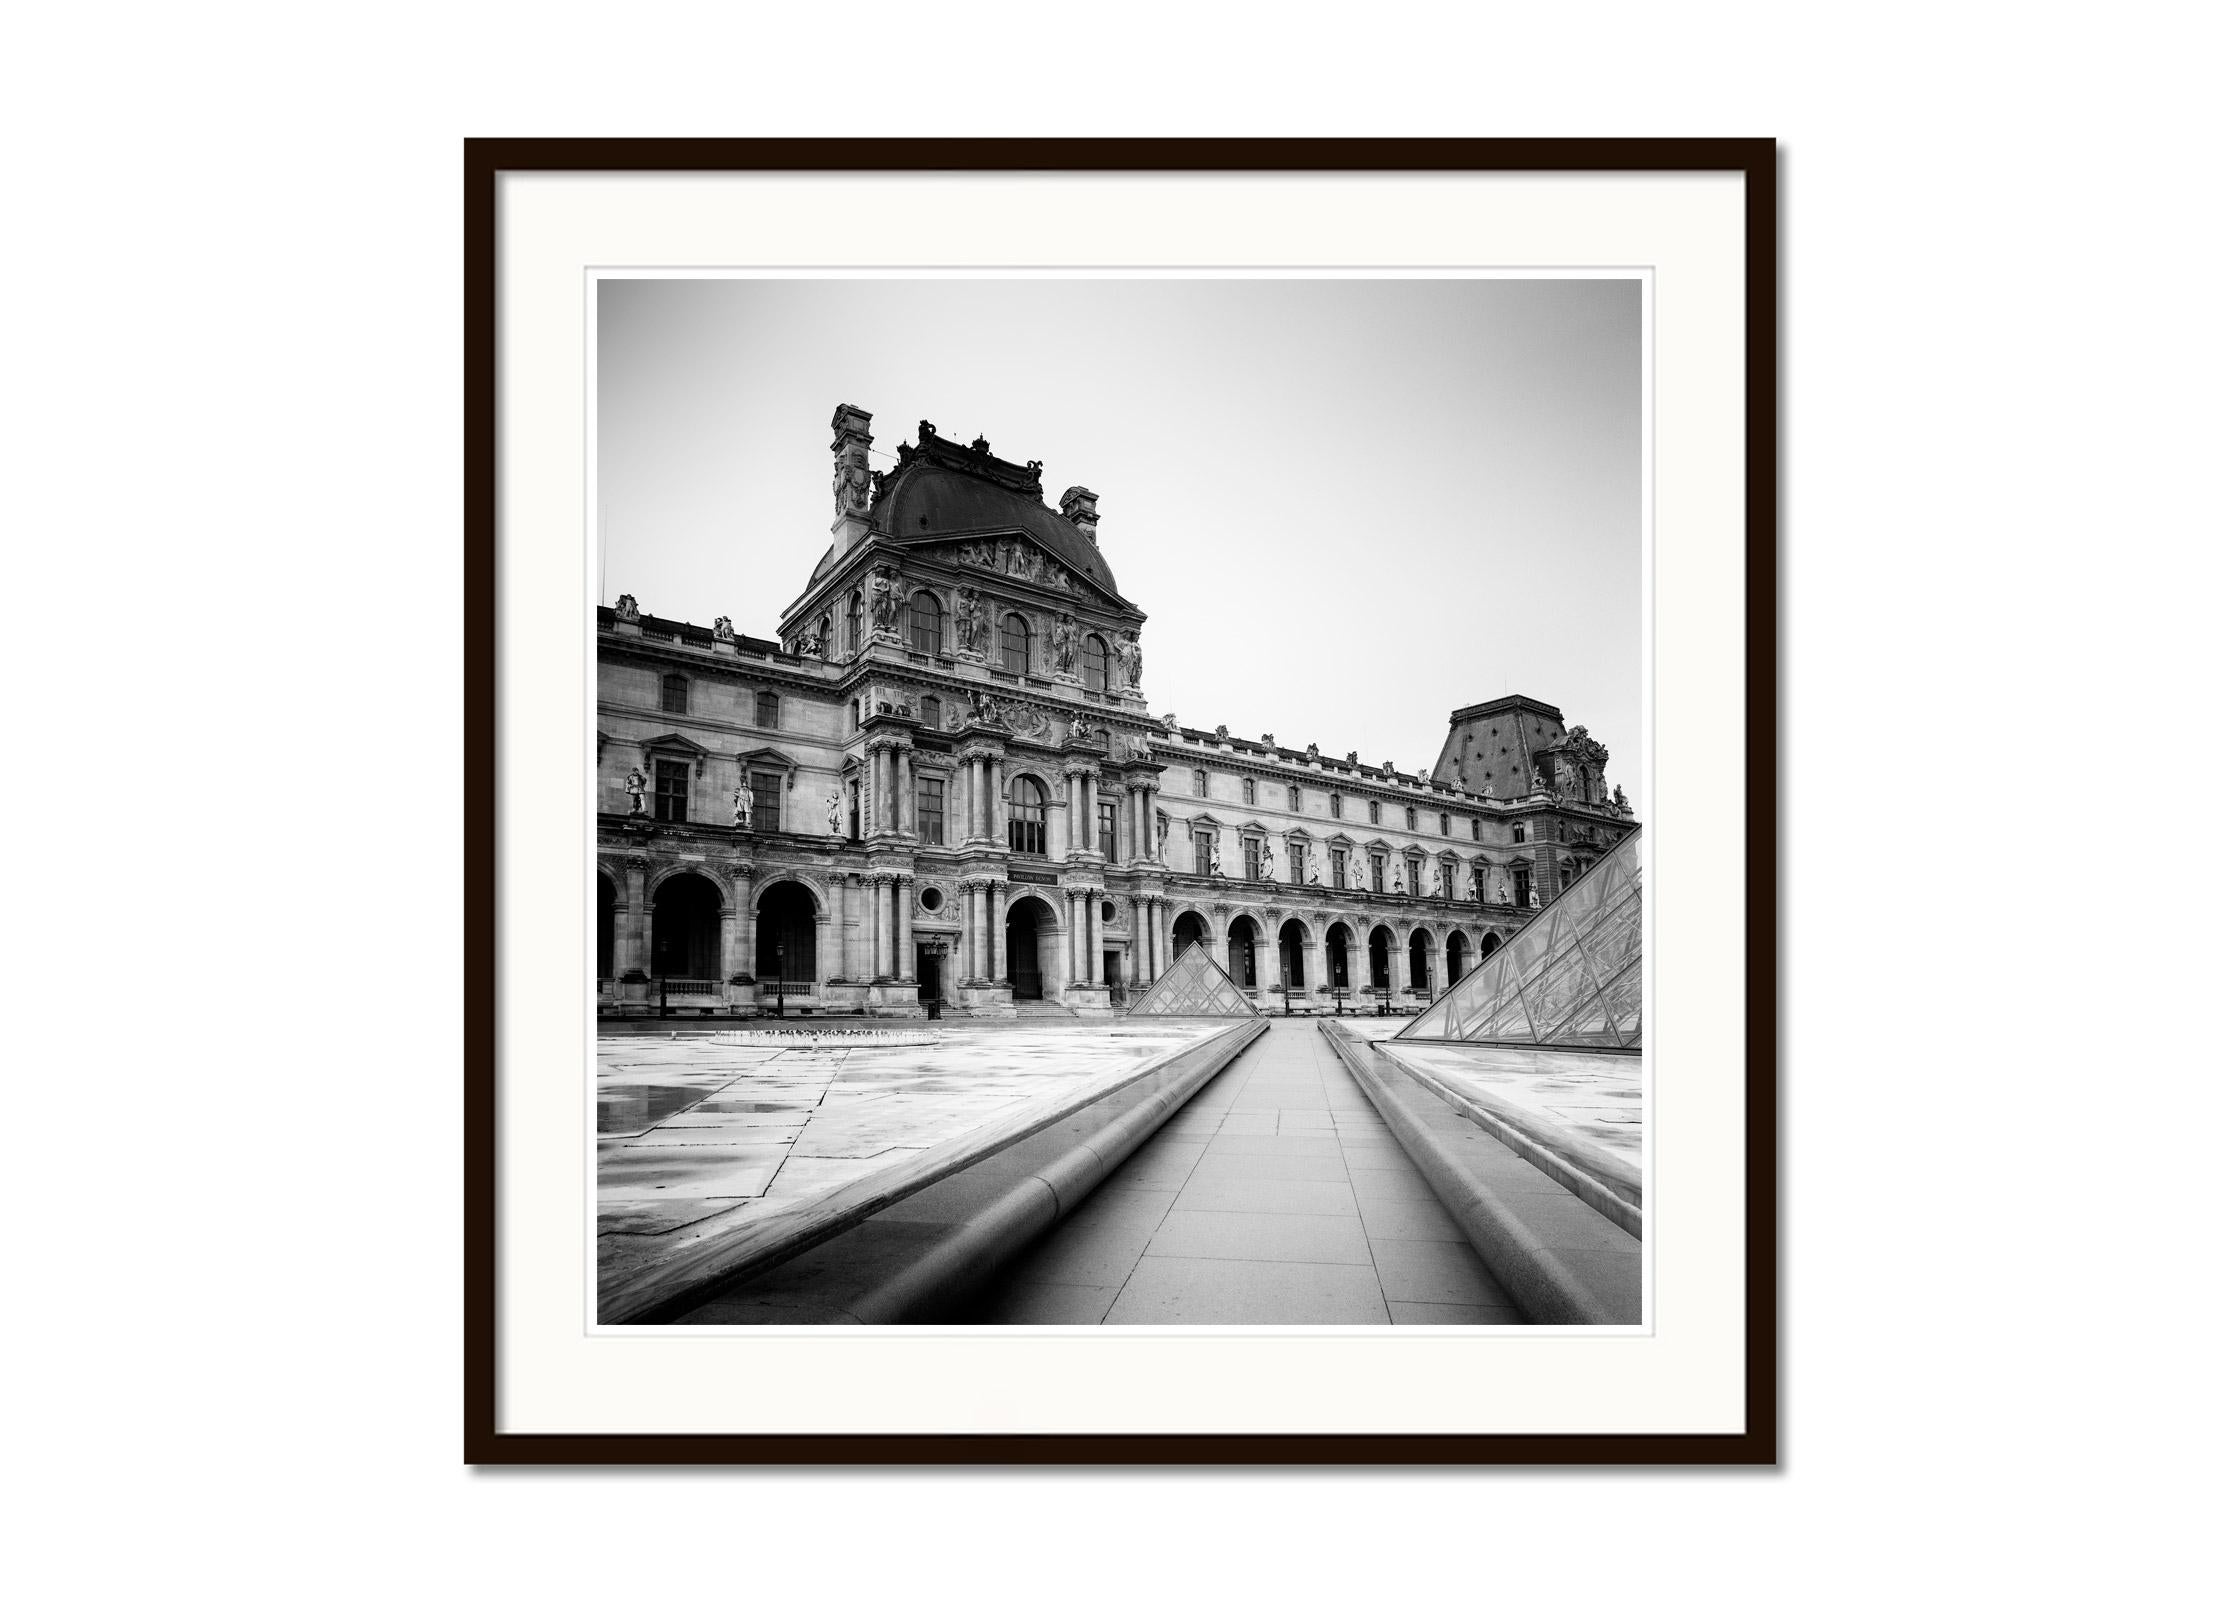 Pavillon Denon, Louvre, Paris, France, black and white cityscape art photography - Gray Black and White Photograph by Gerald Berghammer